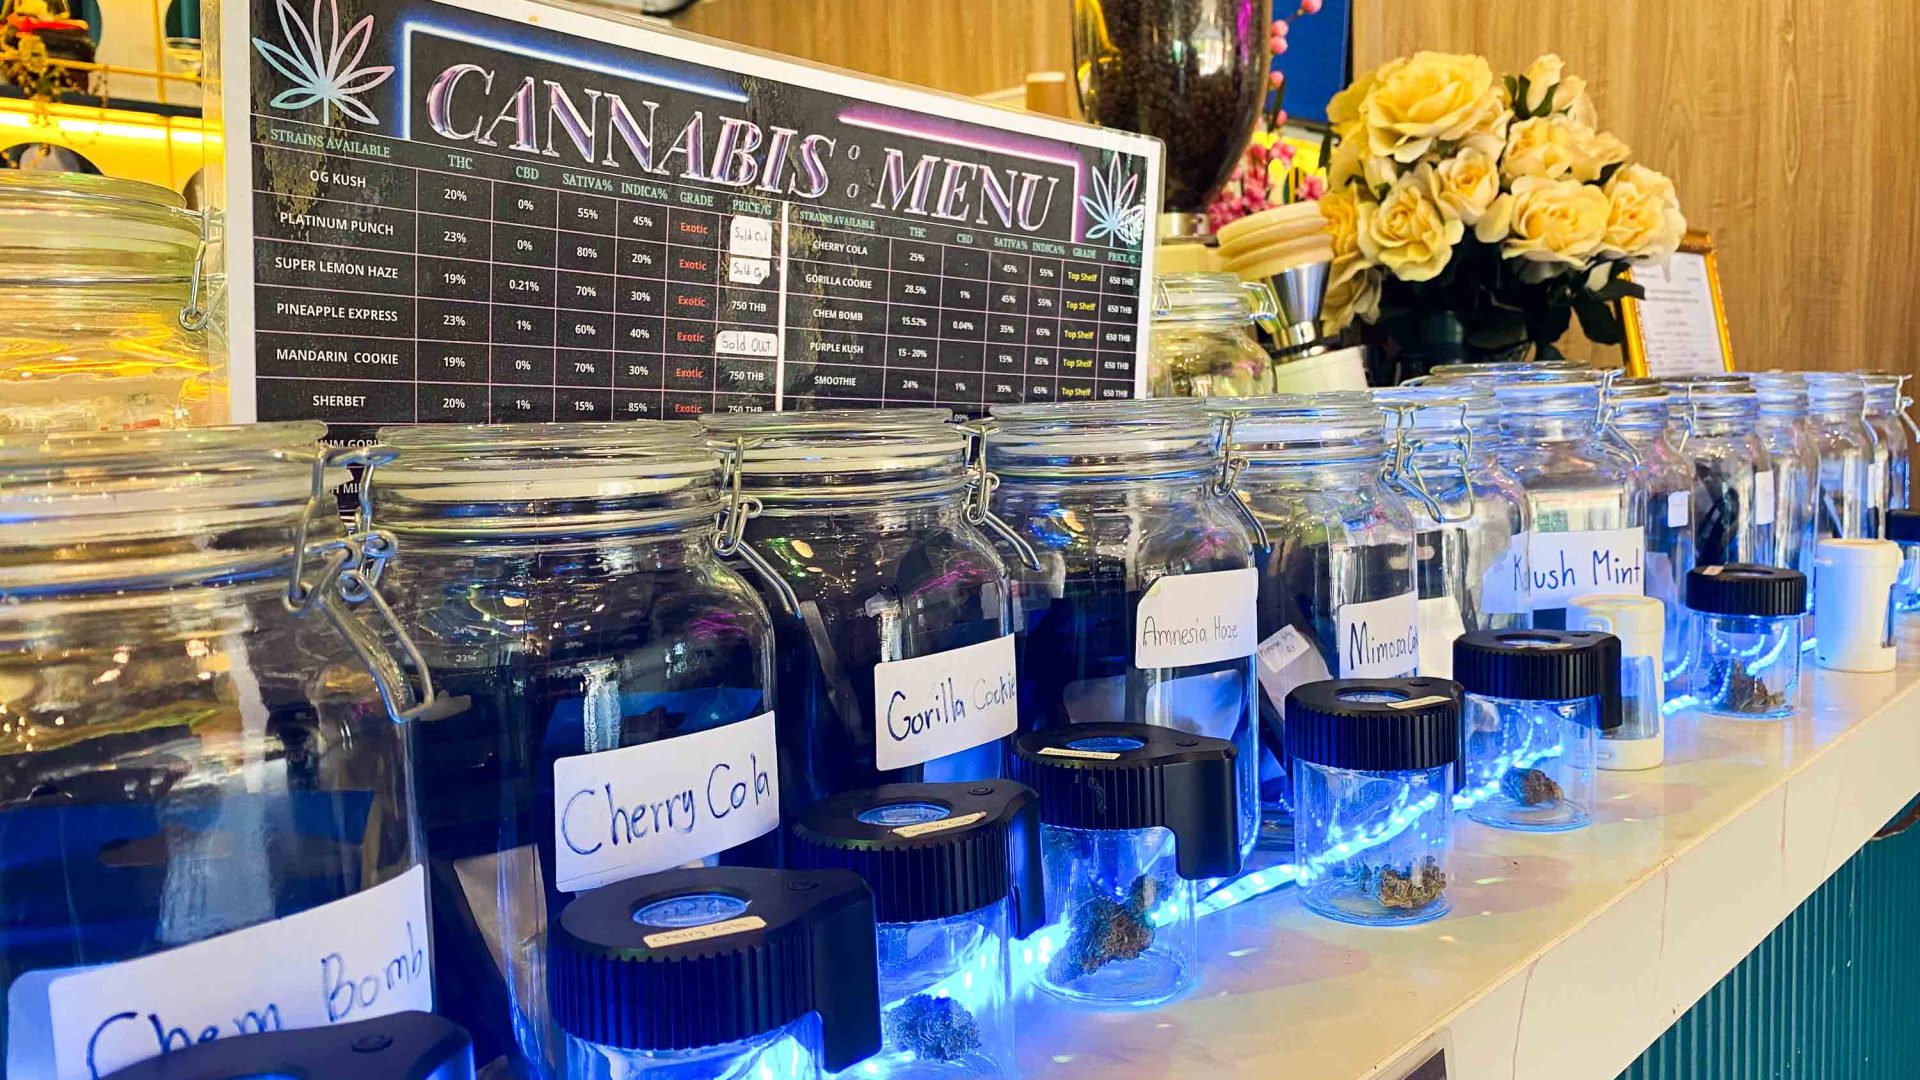 An assortment of jars holding different types of cannabis.